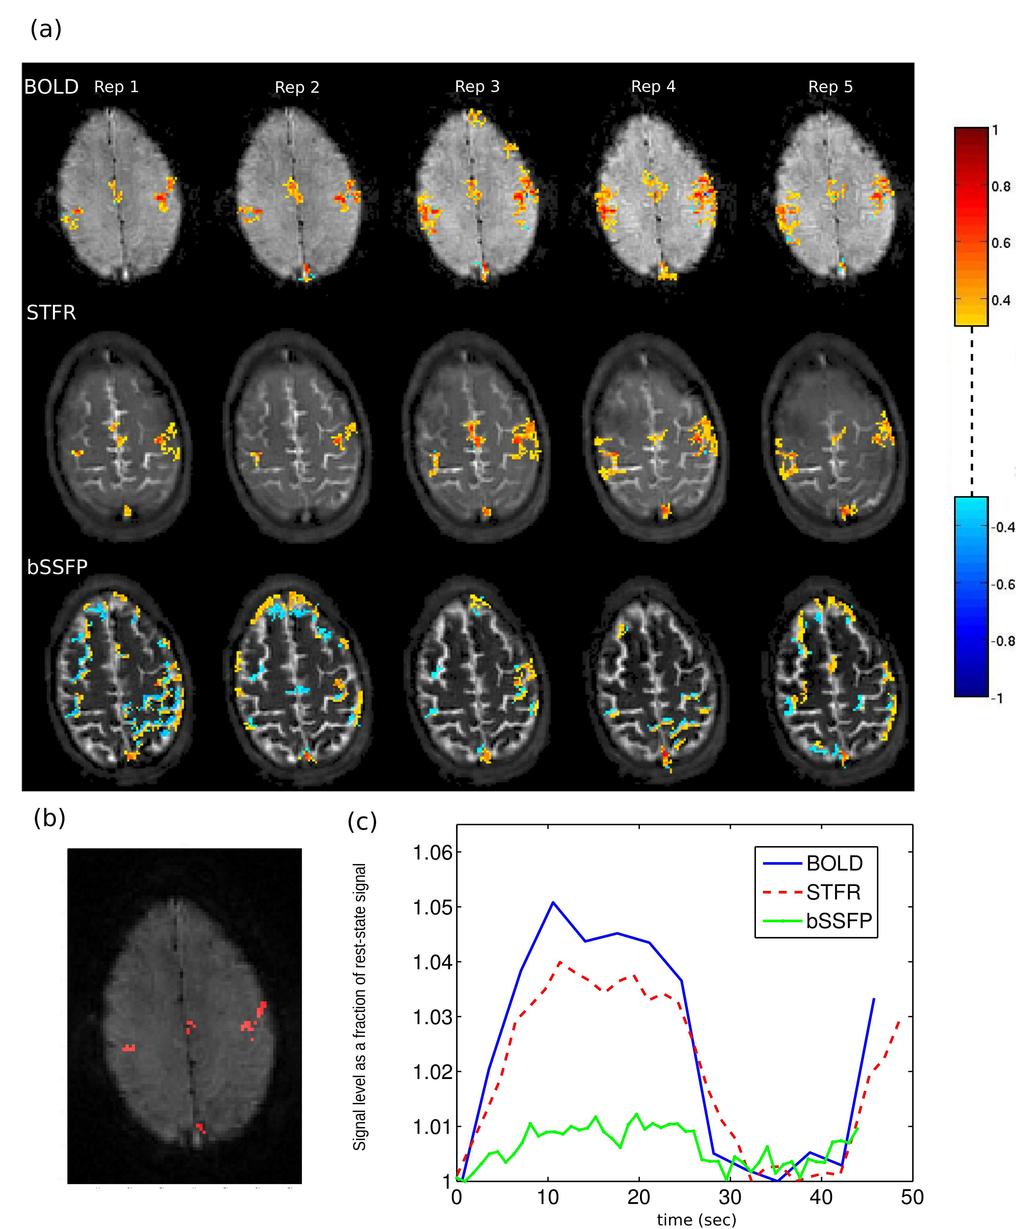 All five scans demonstrate that STFR can produce similar activation maps as BOLD, which are well localized to the motor cortex area.